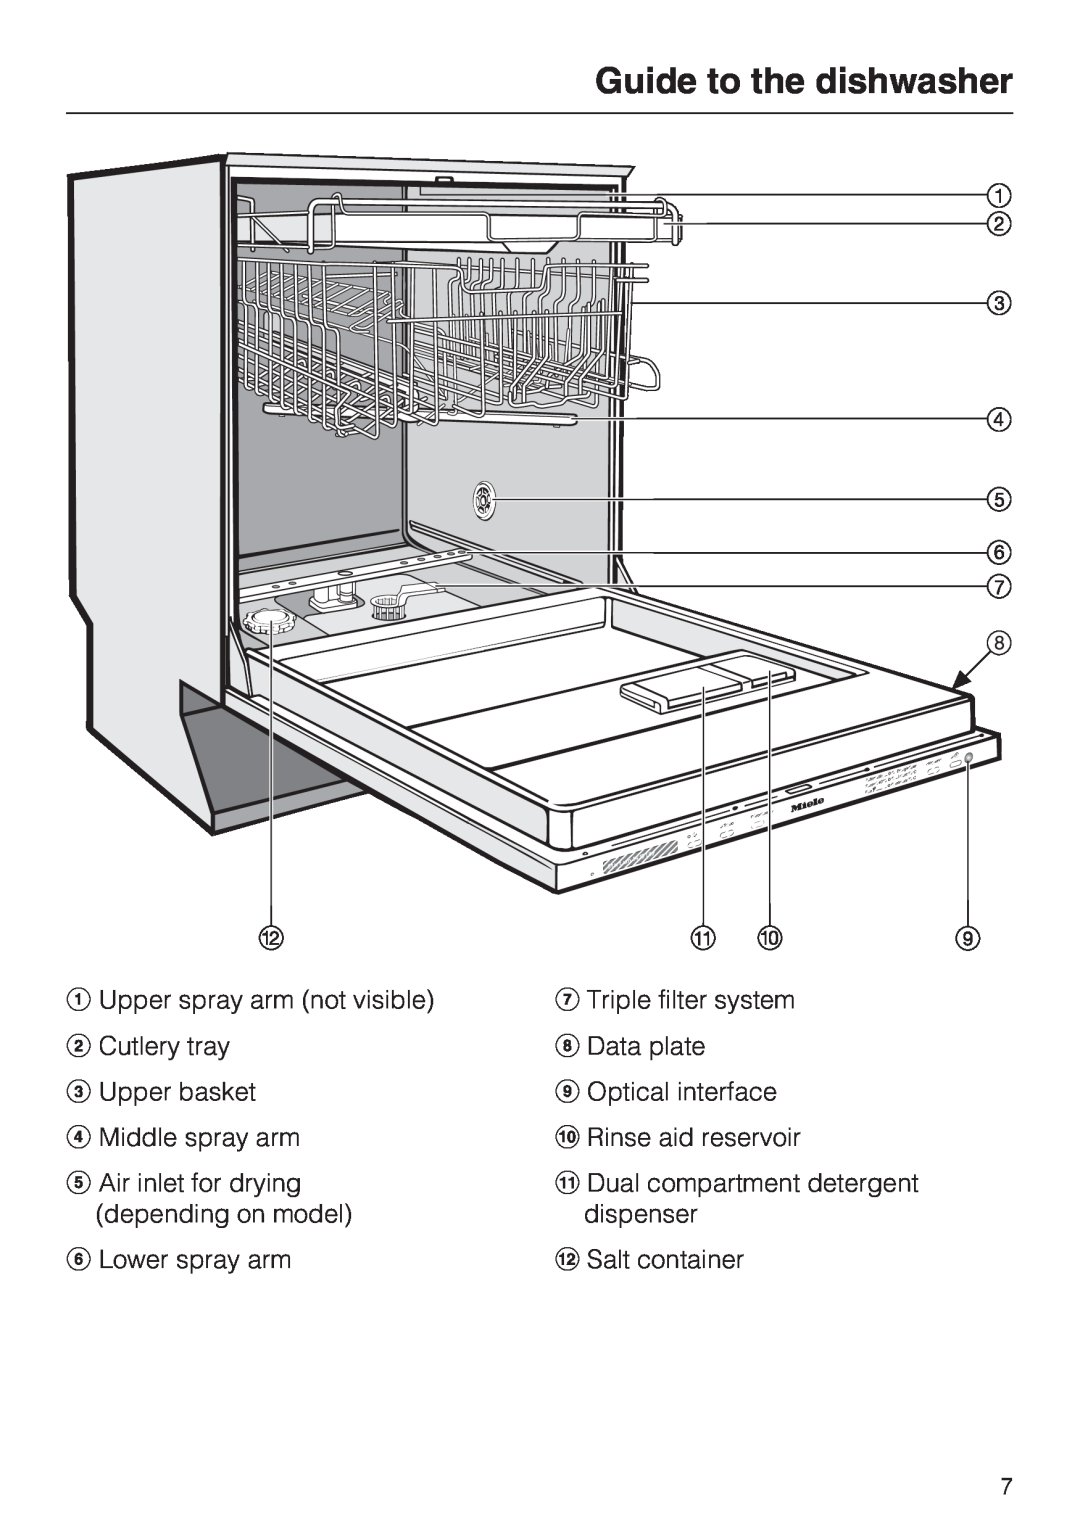 Miele G 5575, G 5570 Guide to the dishwasher, Upper spray arm not visible Cutlery tray, Upper basket Middle spray arm 